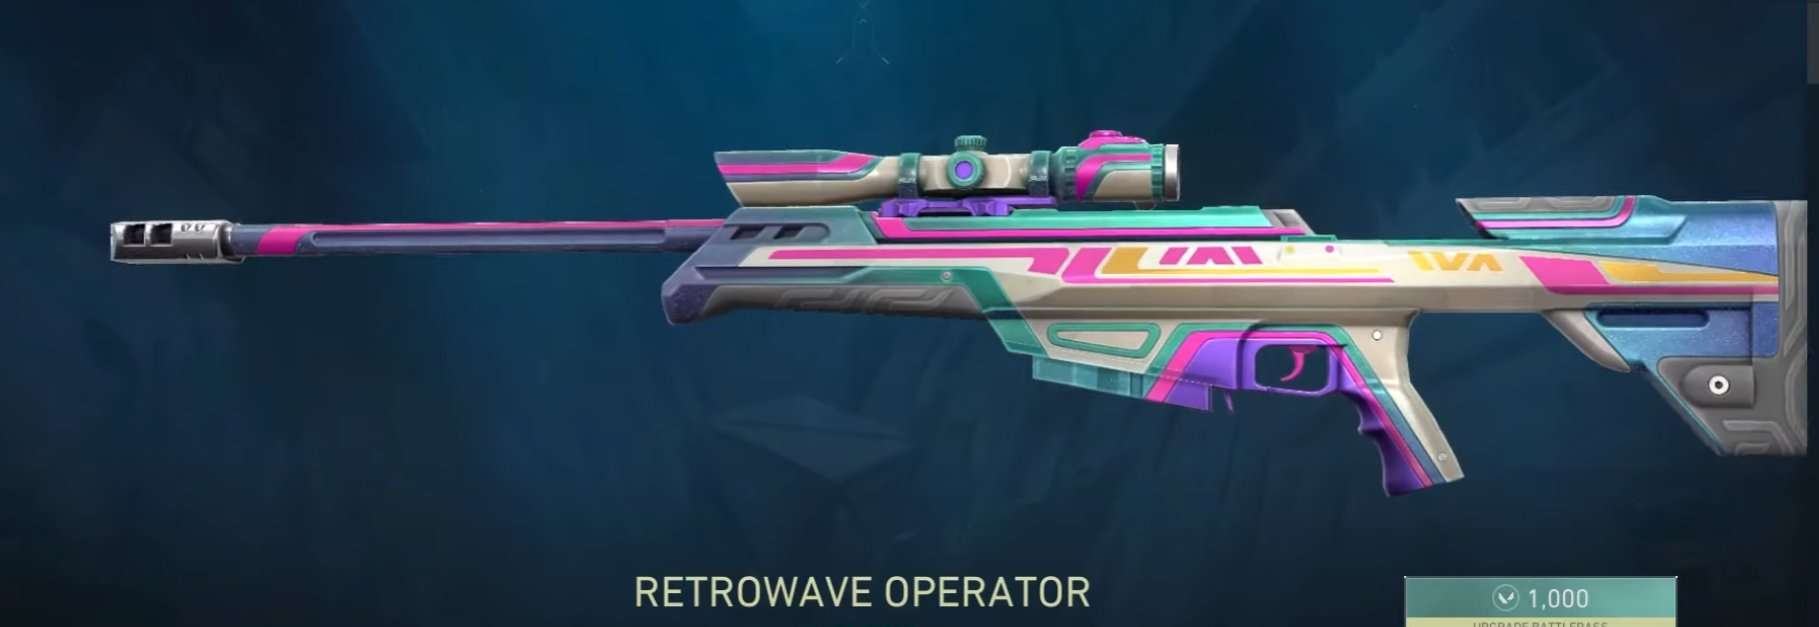 The Retrowave Operator will please fans of the Vaporwave aesthetic. Source: Riot Games and @ValorantUpdated on Twitter.com